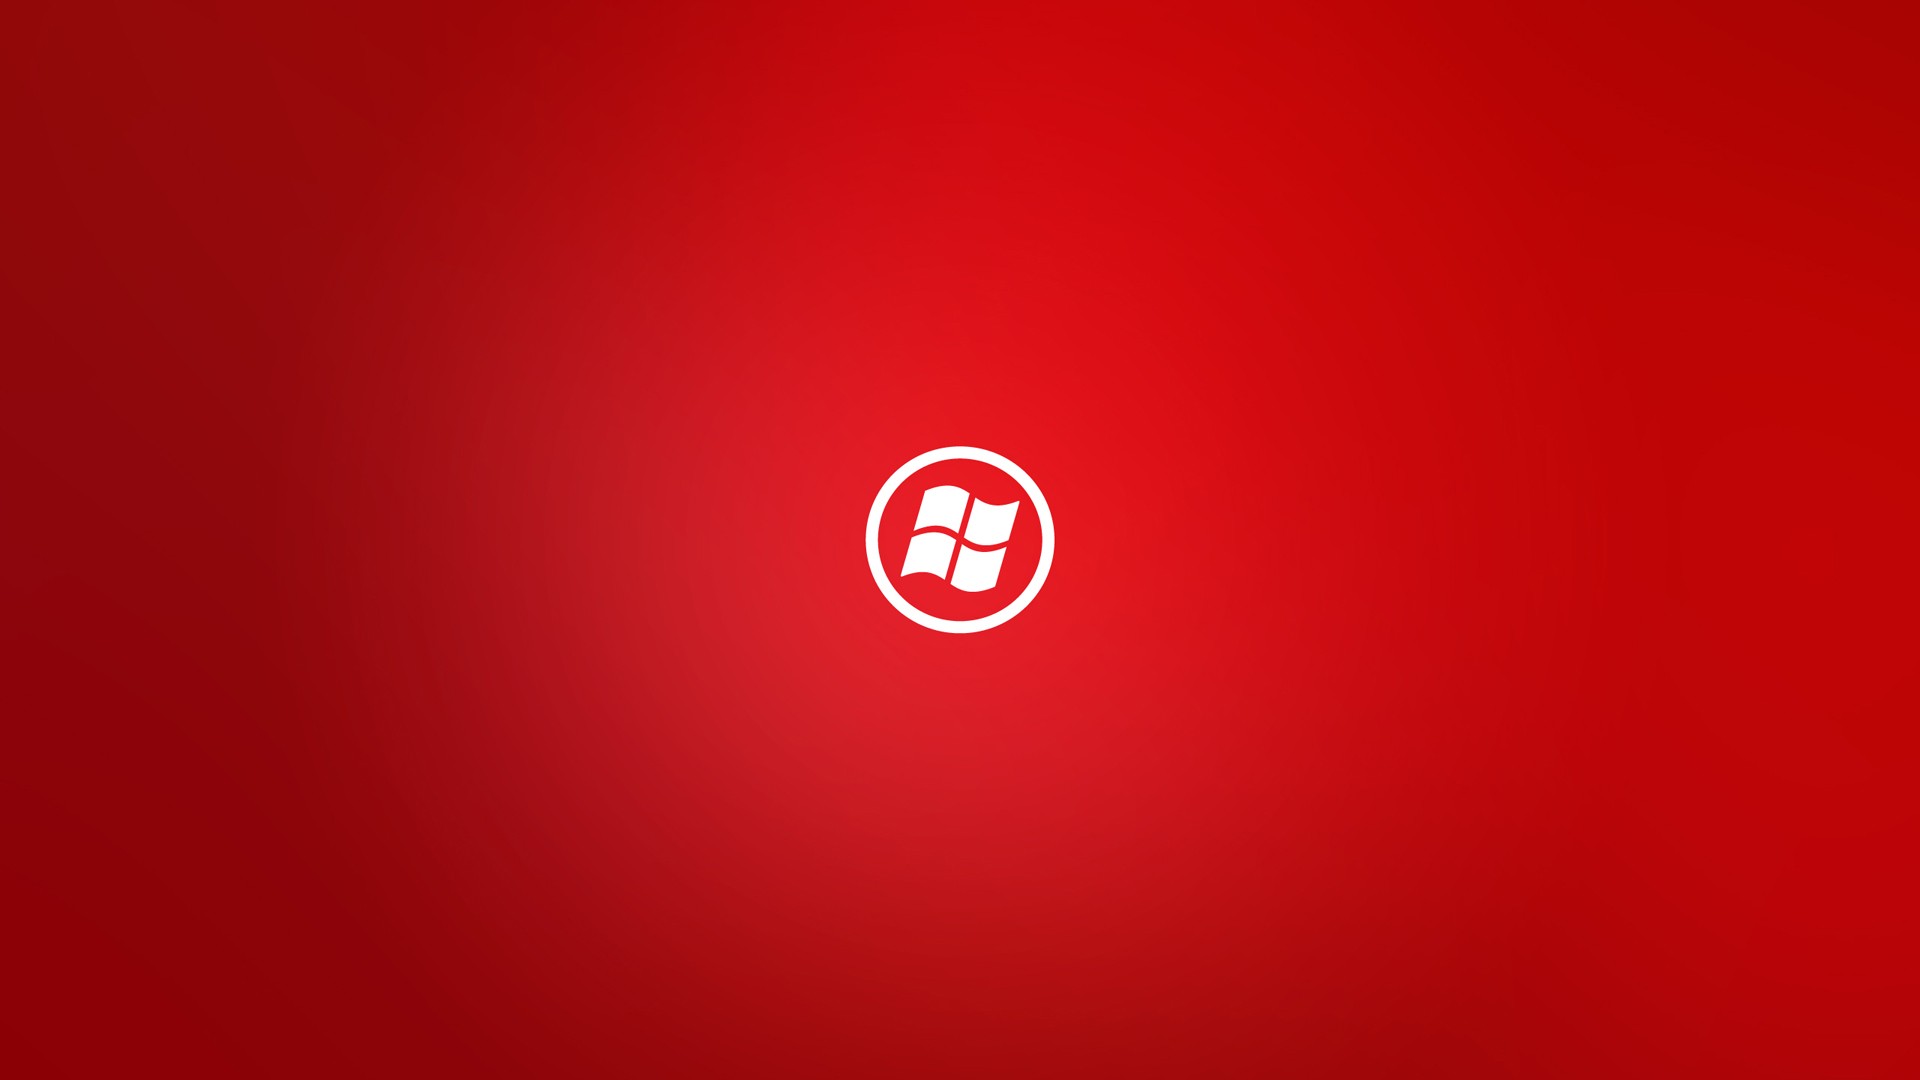 Wallpaper Details File Name Red Windows Uploaded By Zordex